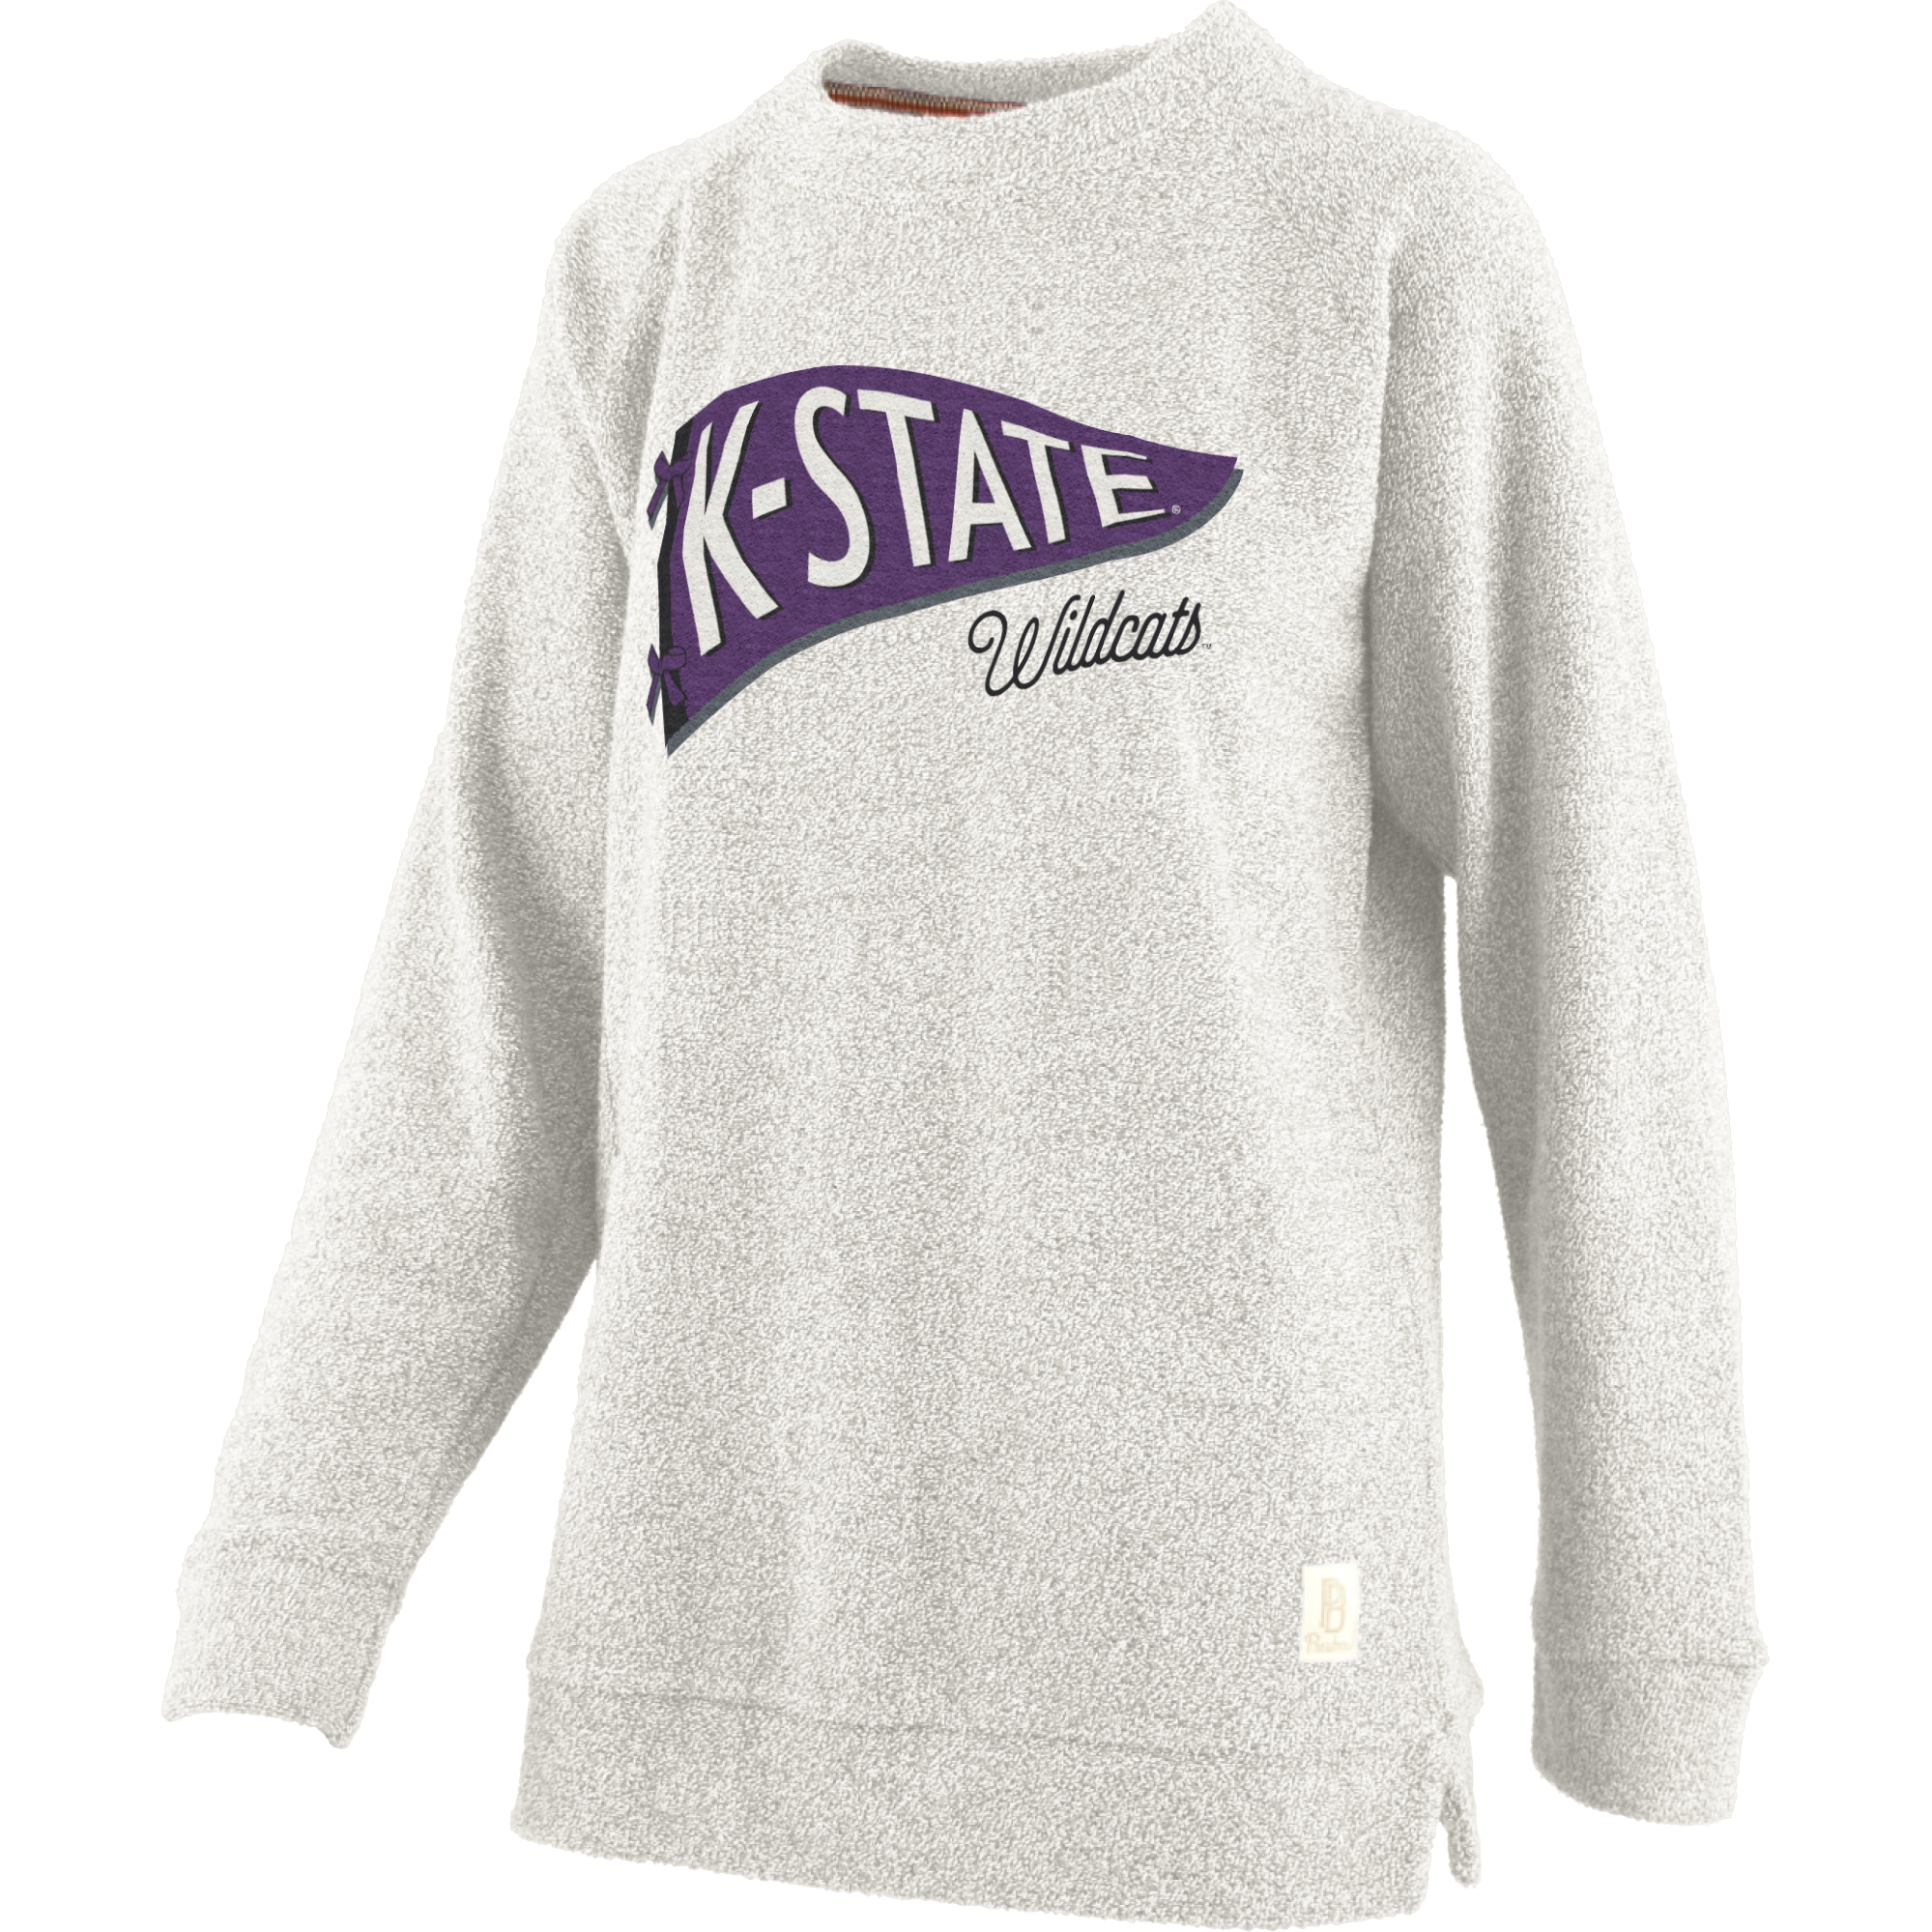 K-State Pennant French Terry Sweatshirt